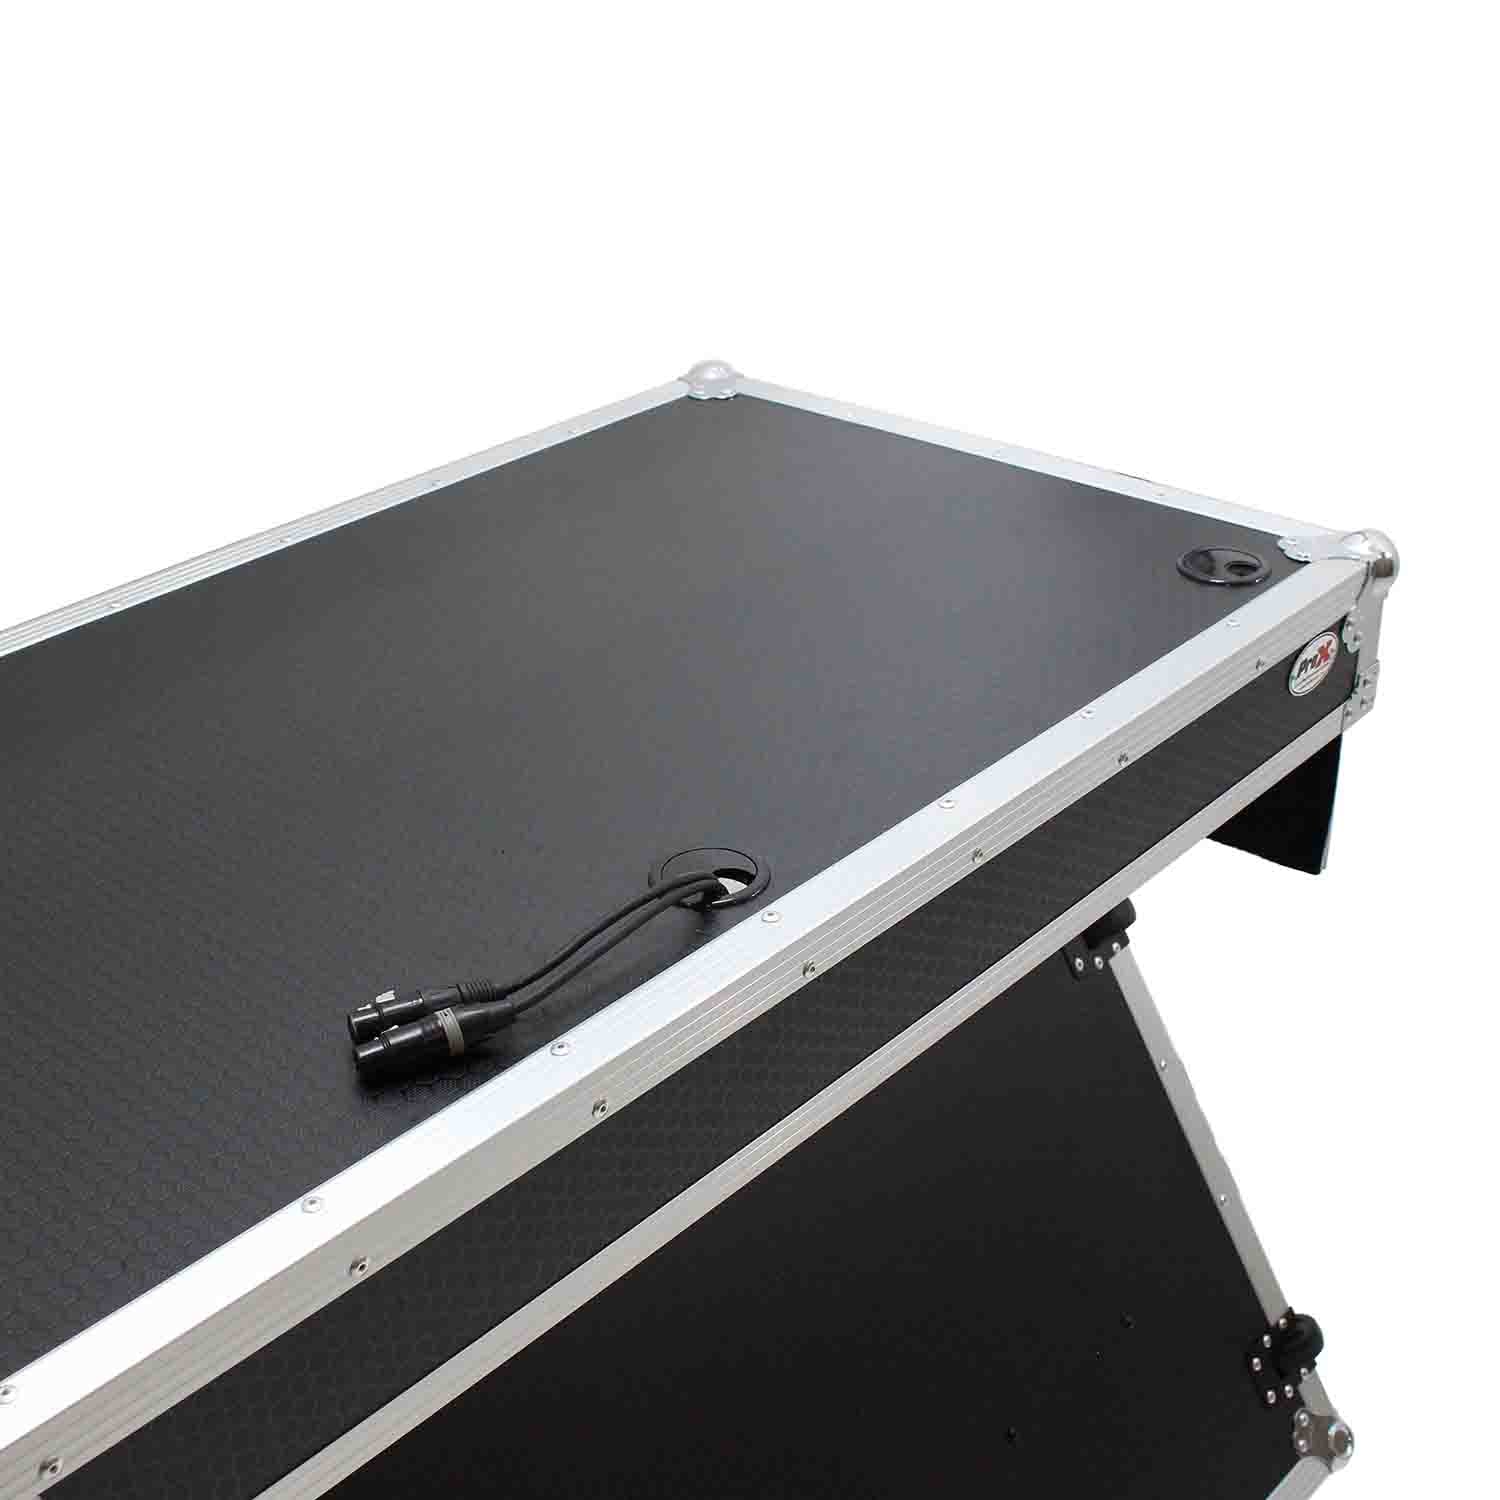 B-Stock: ProX XS-ZTABLE-MK2 DJ Flight Case Table and DJ Workstation With Handles and Wheels by ProX Cases